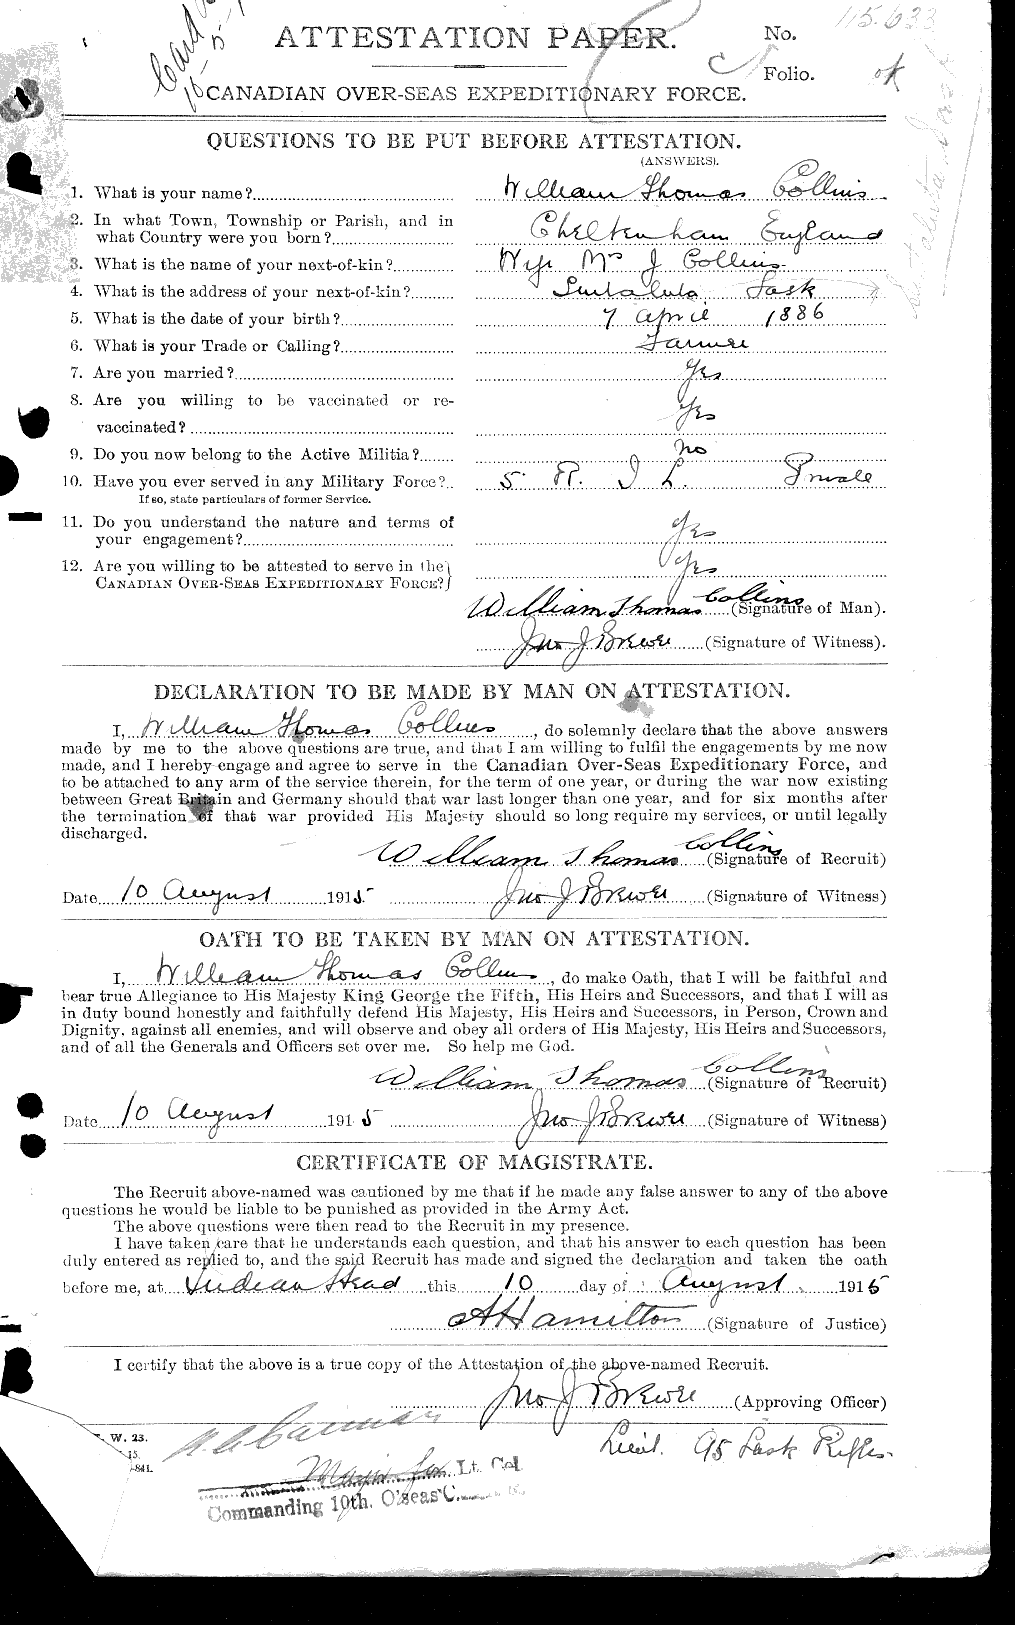 Personnel Records of the First World War - CEF 034633a